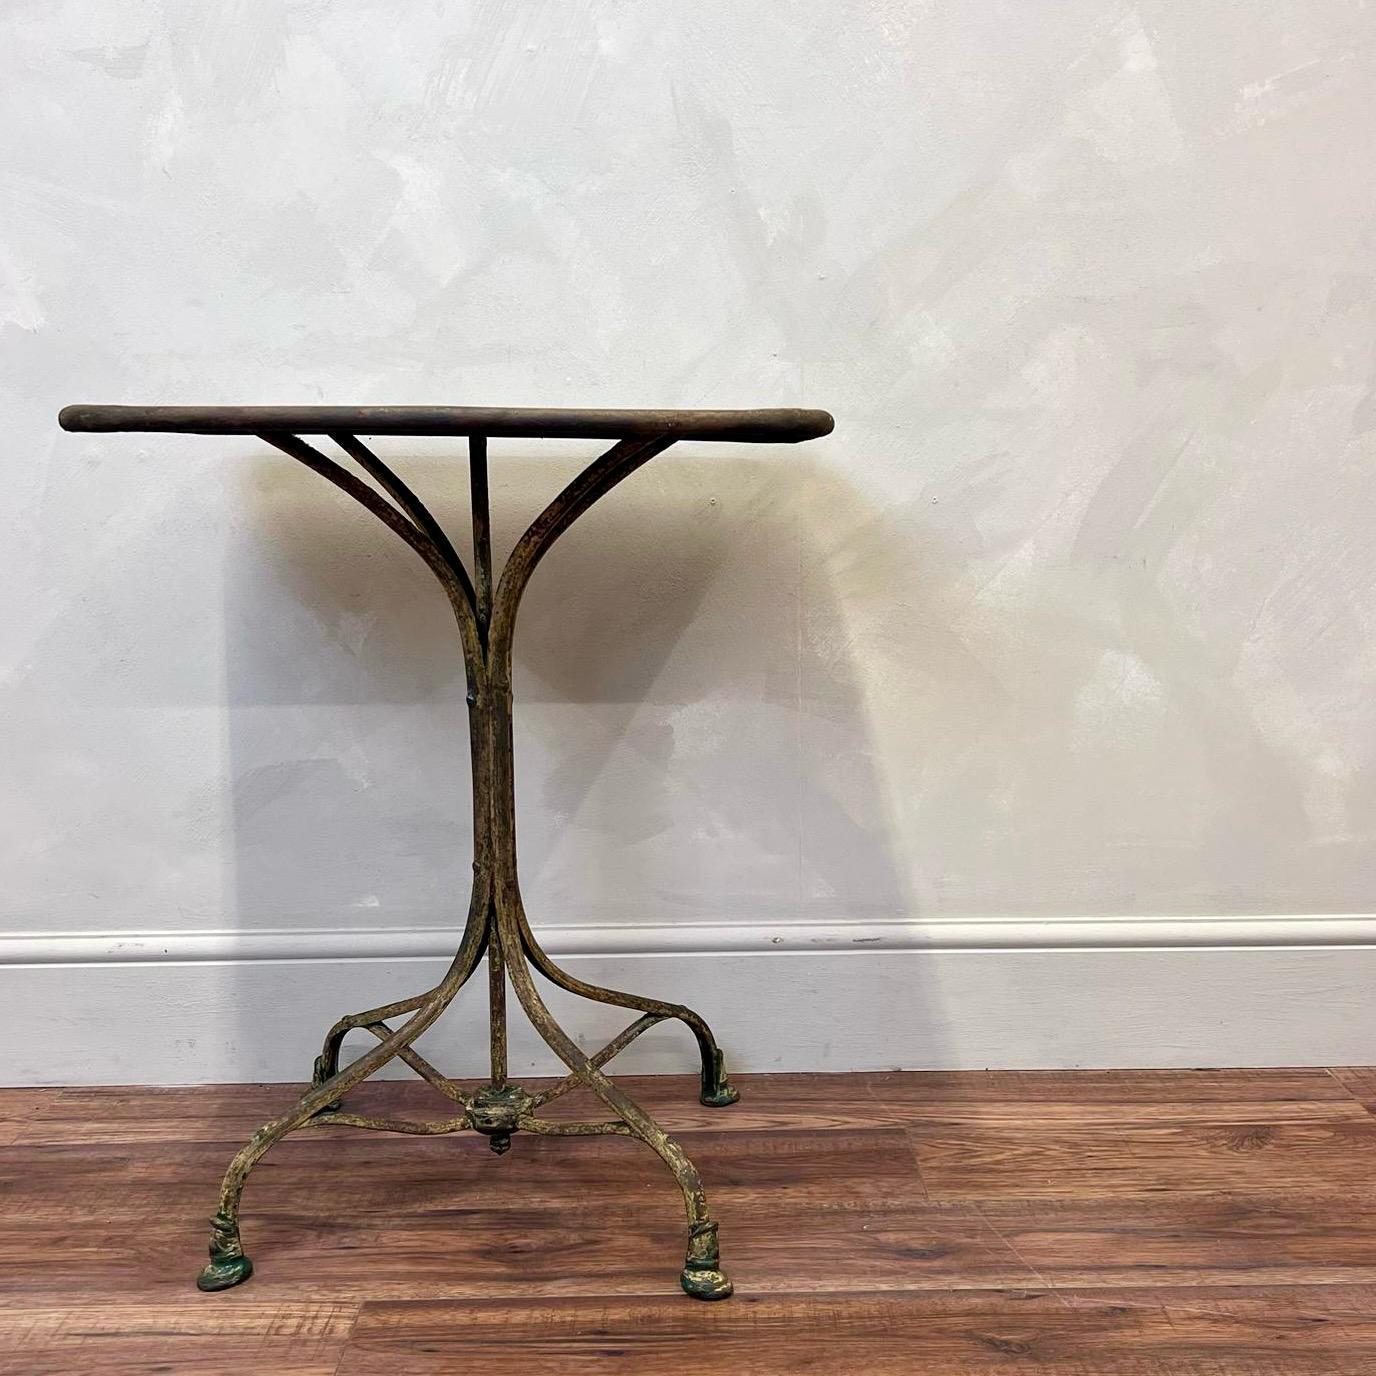 French Bistro Table with wonderful orignal green scraped paint and splayed out legs.
Very sturdy, with no wear holes to the top.
Attributed to the Arras bistro tables of this era.
Would work inside or outside of the home 

France c1900.

Height -